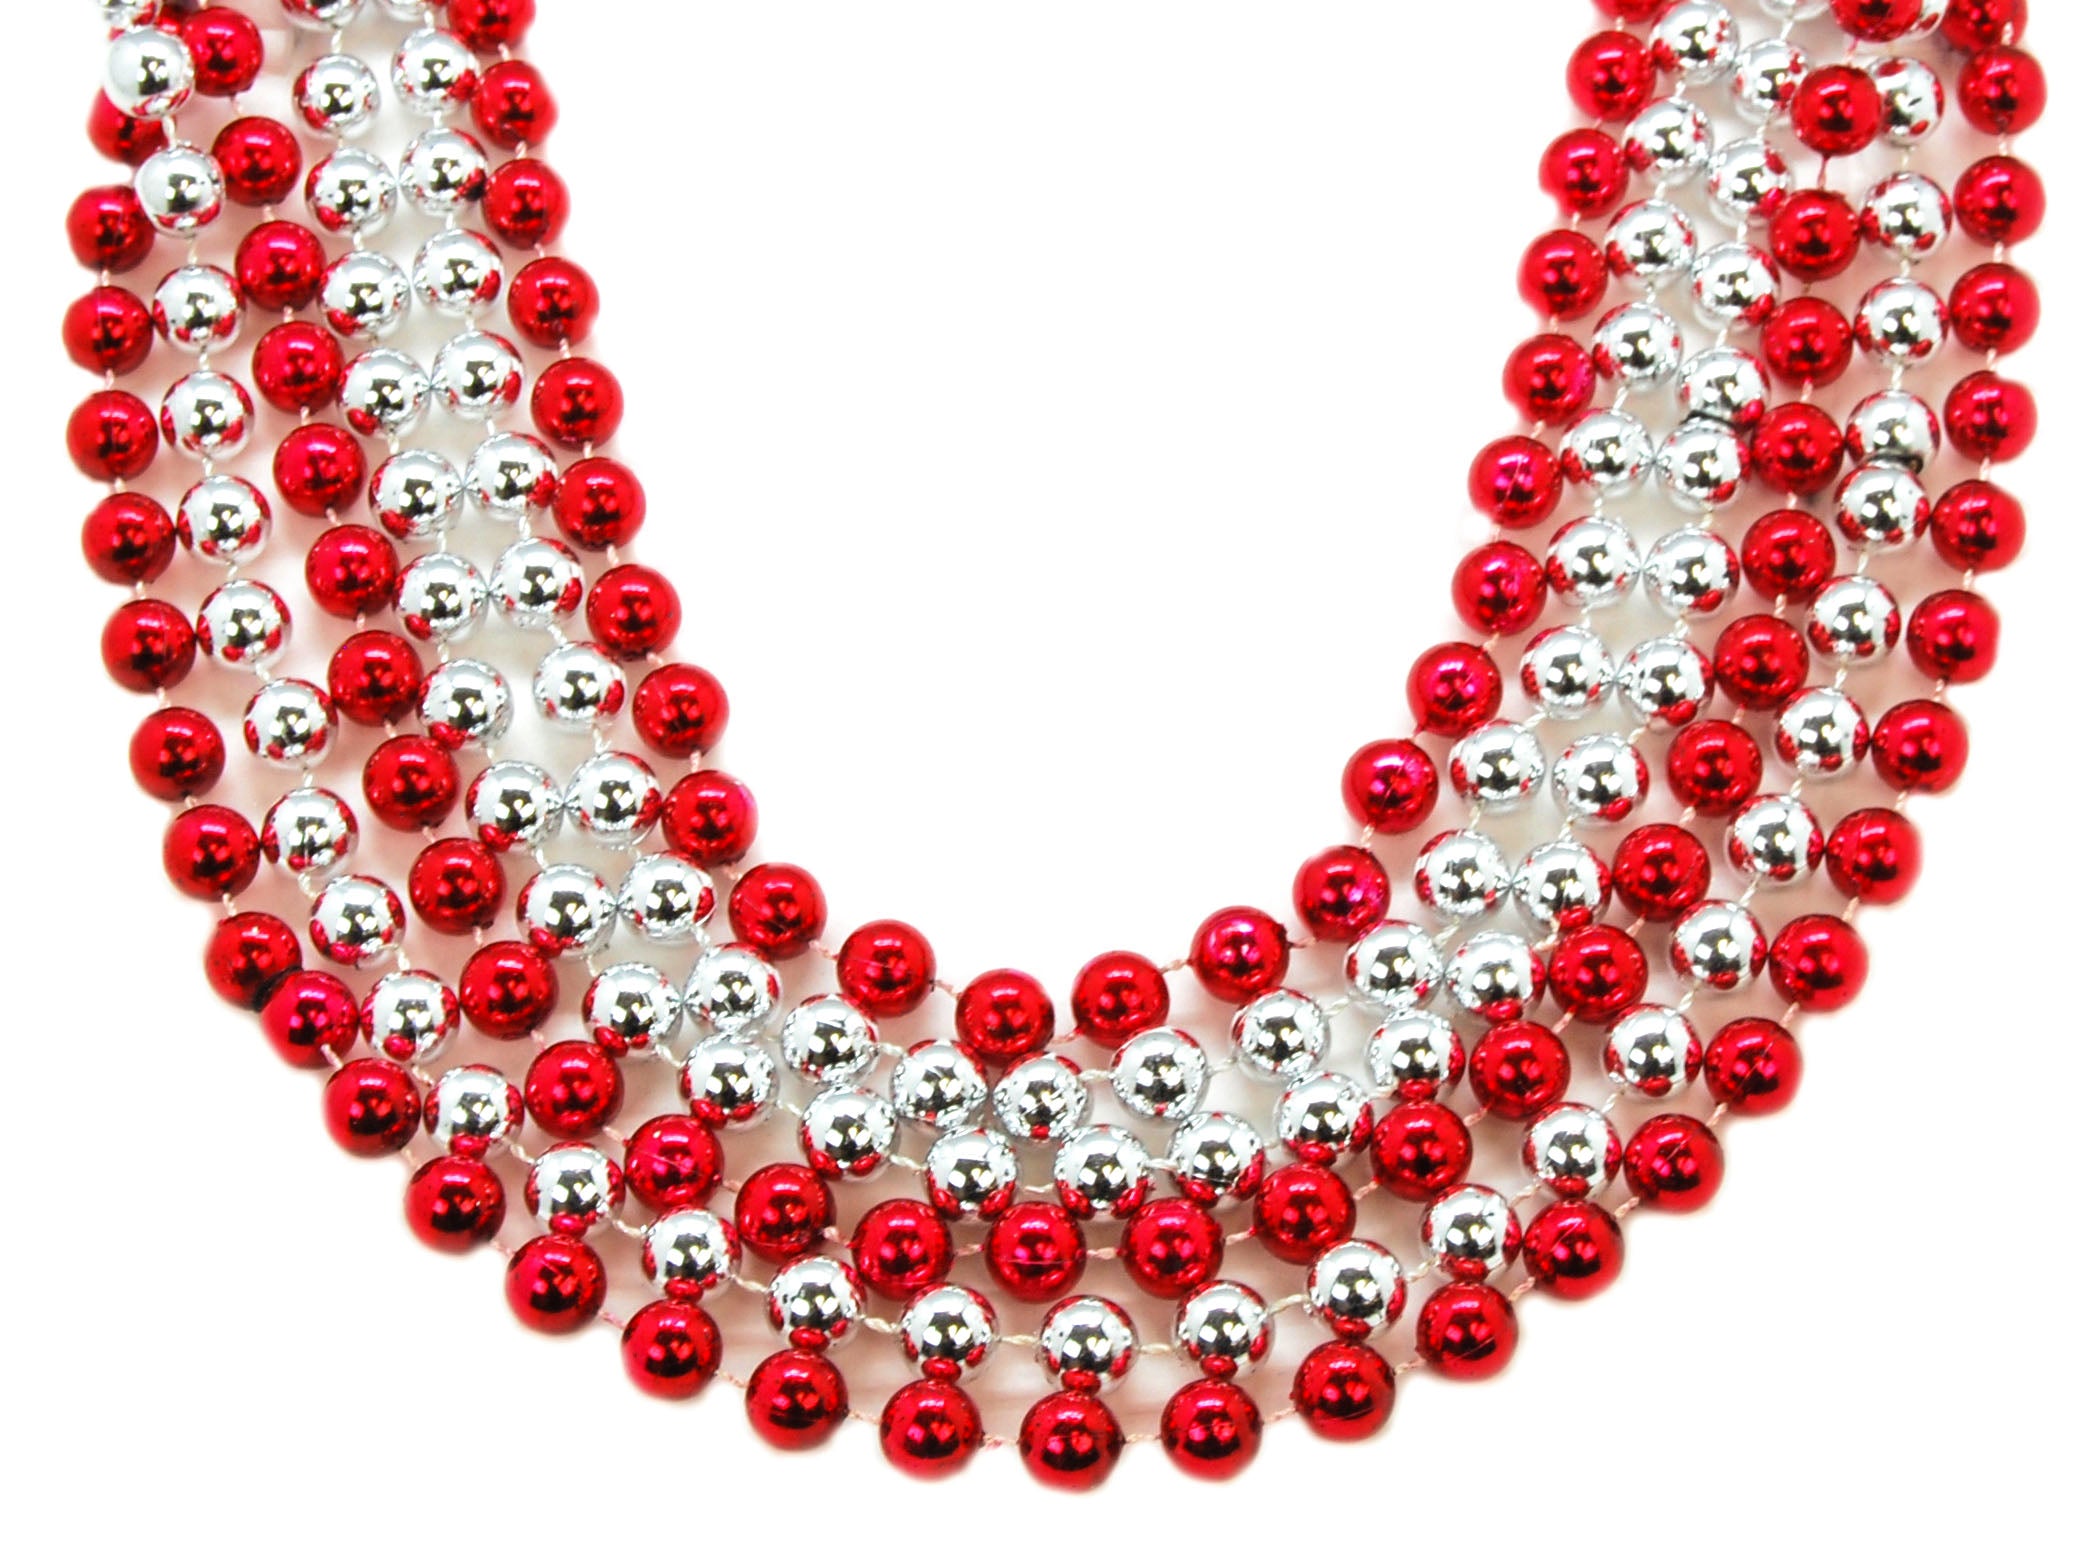 Little Round White Beads With Red Hearts 20 Pieces